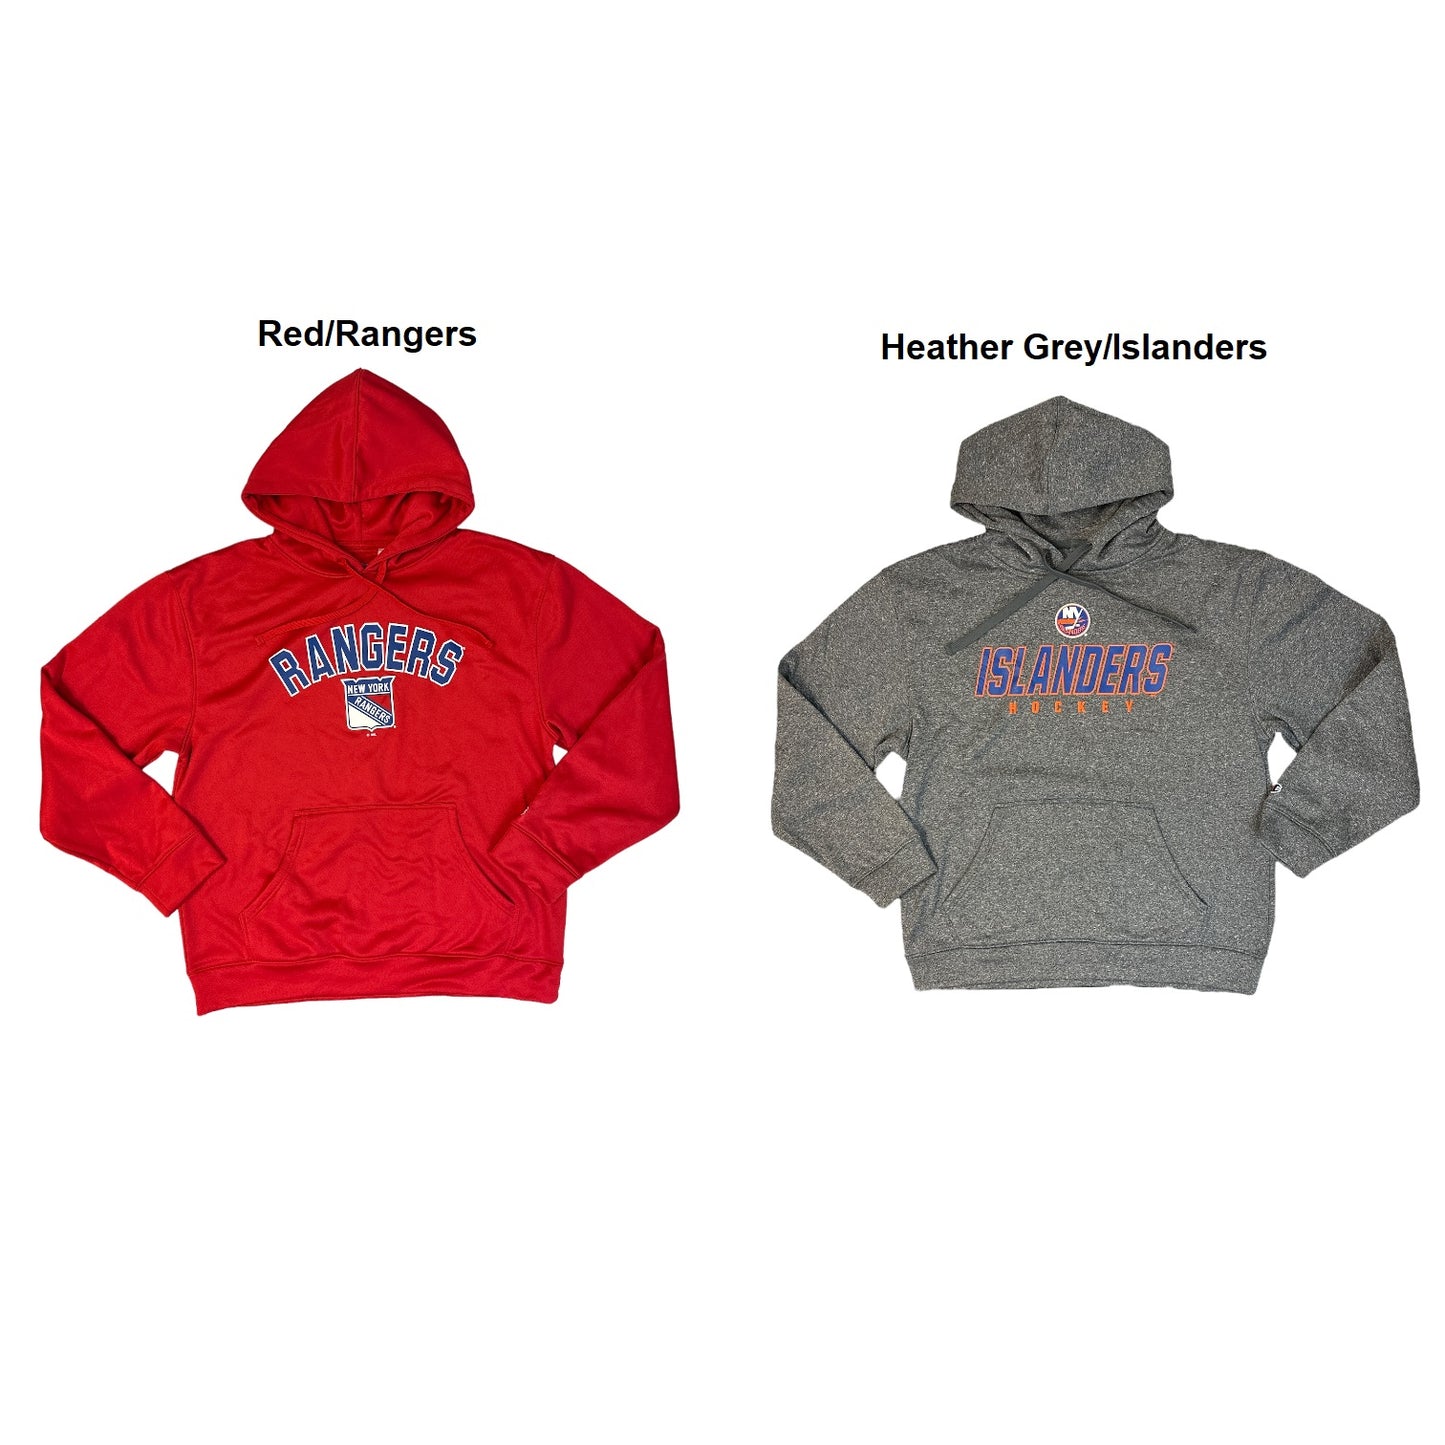 Champion Men's NHL Fleece Lined Pullover Hoodie